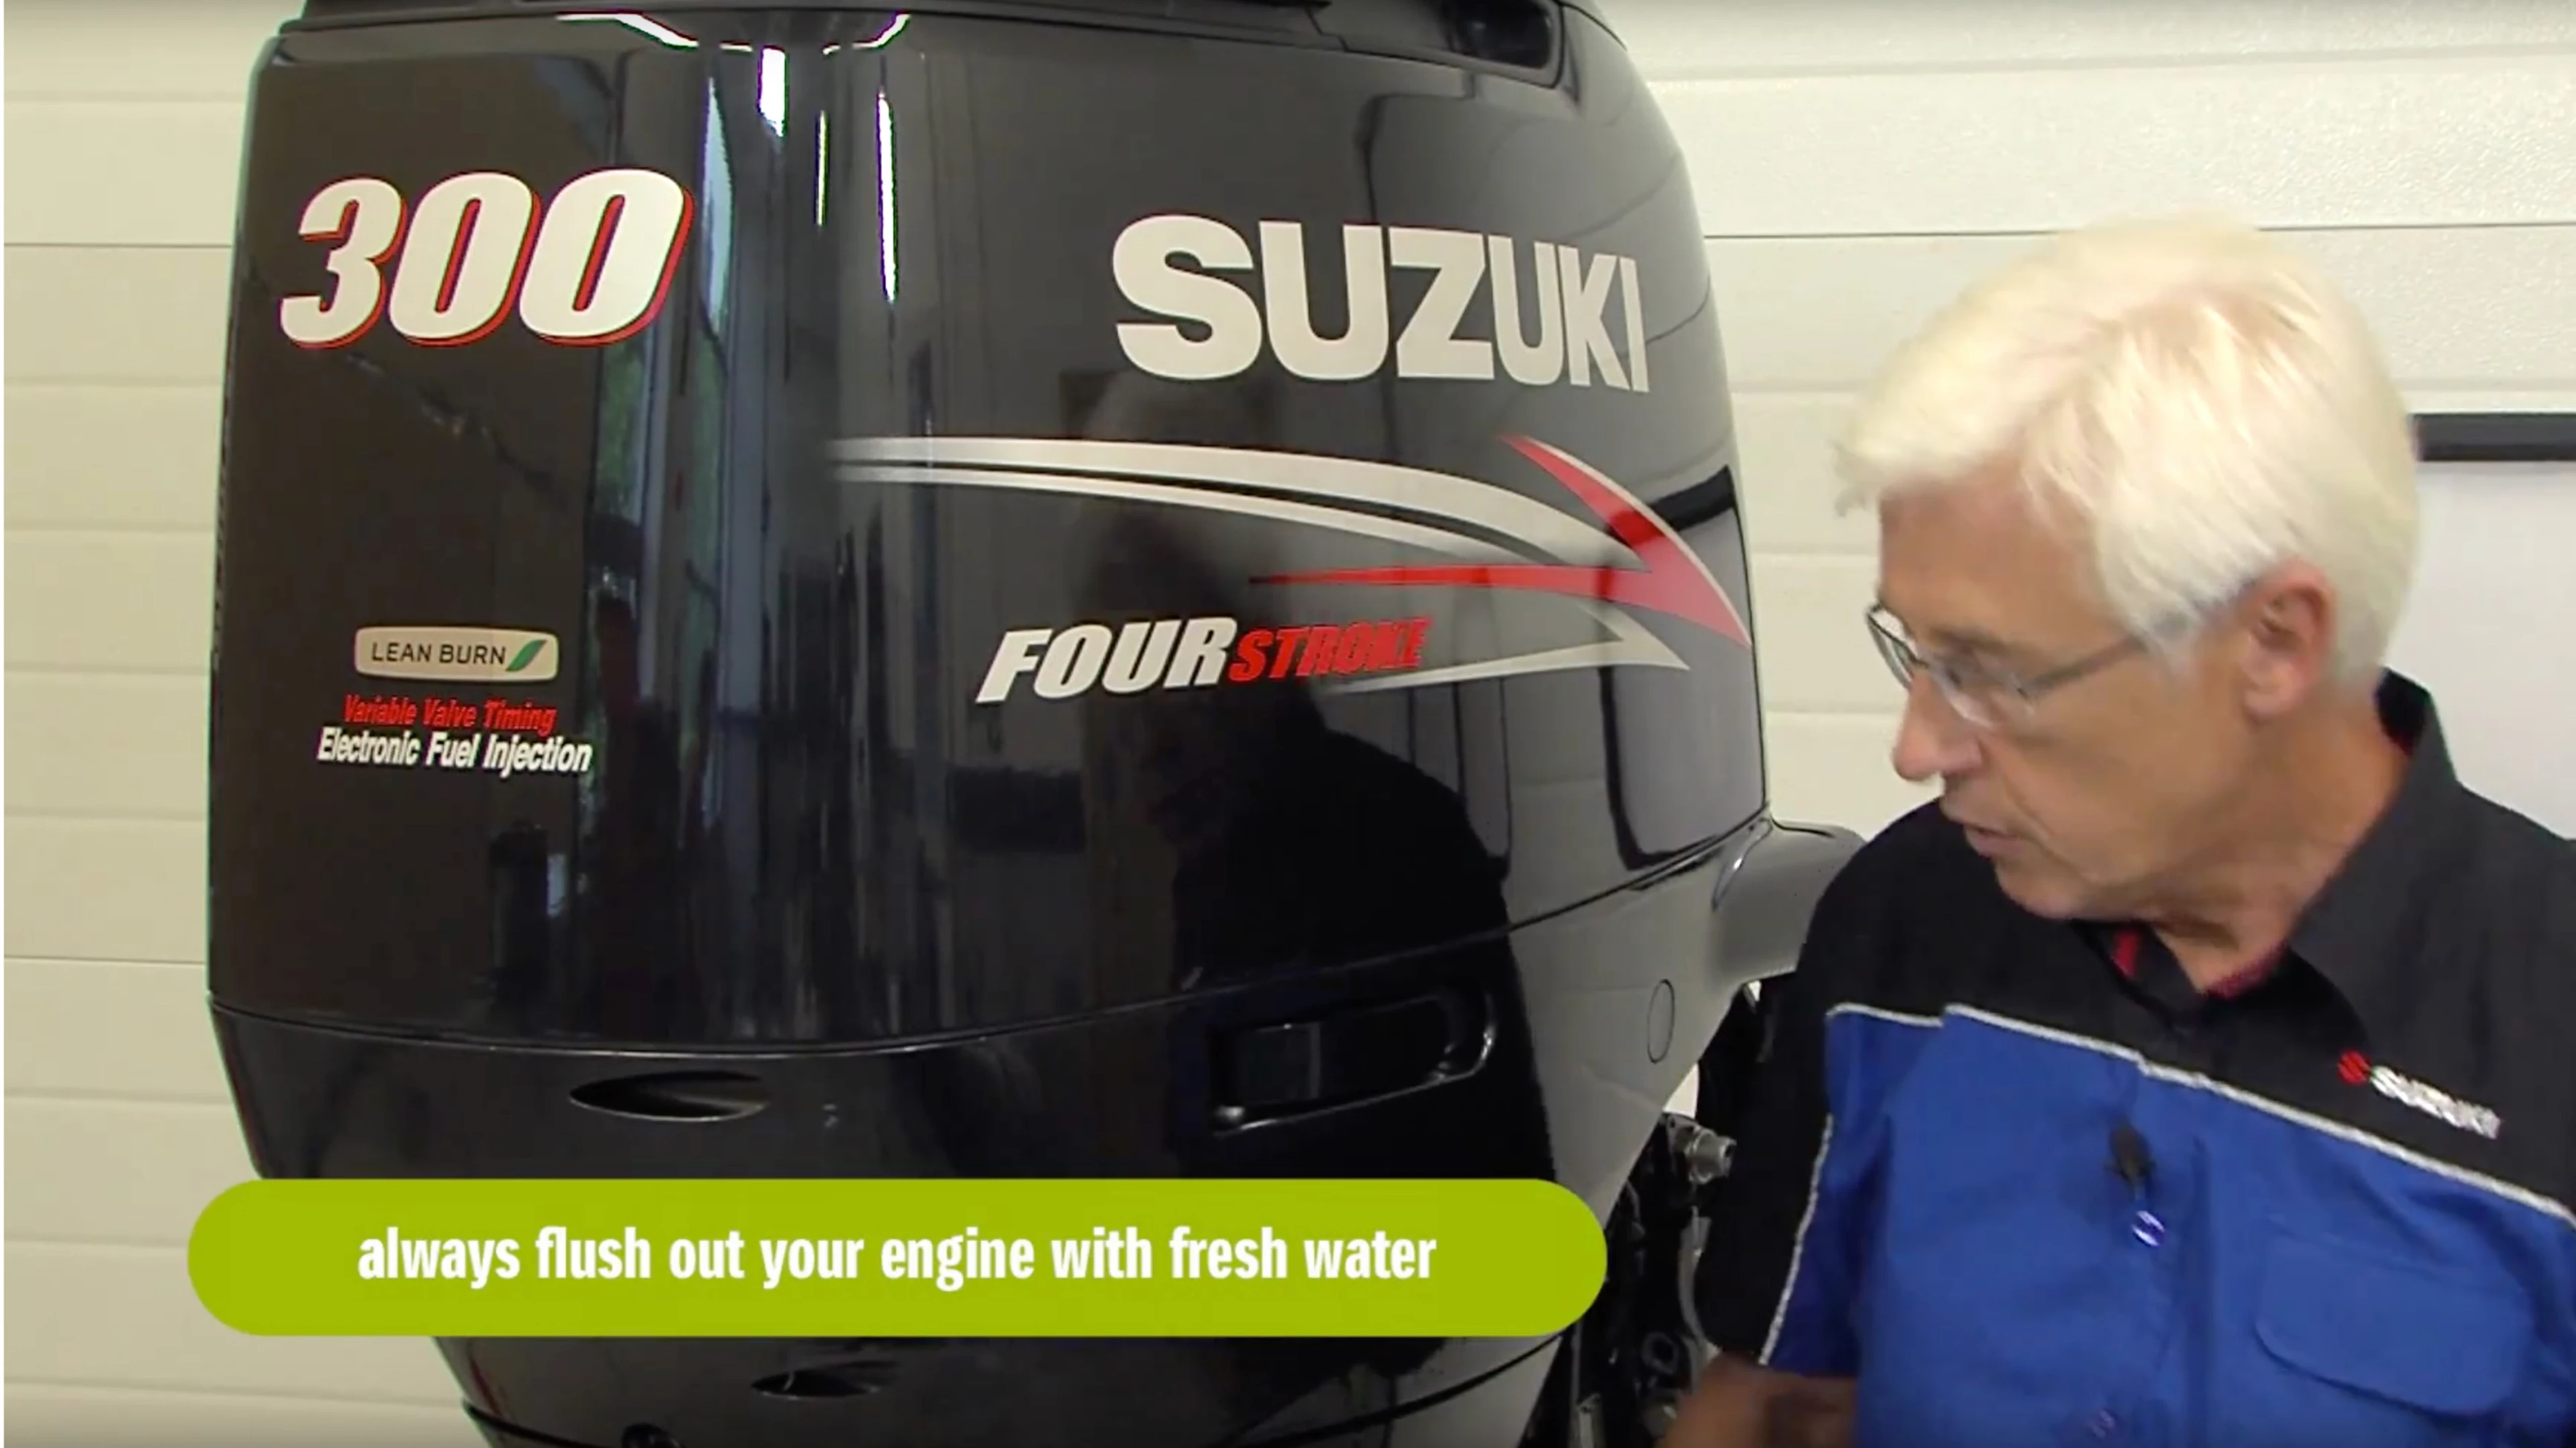 An engineer glancing at their Suzuki outboard with a manuscript in hand.